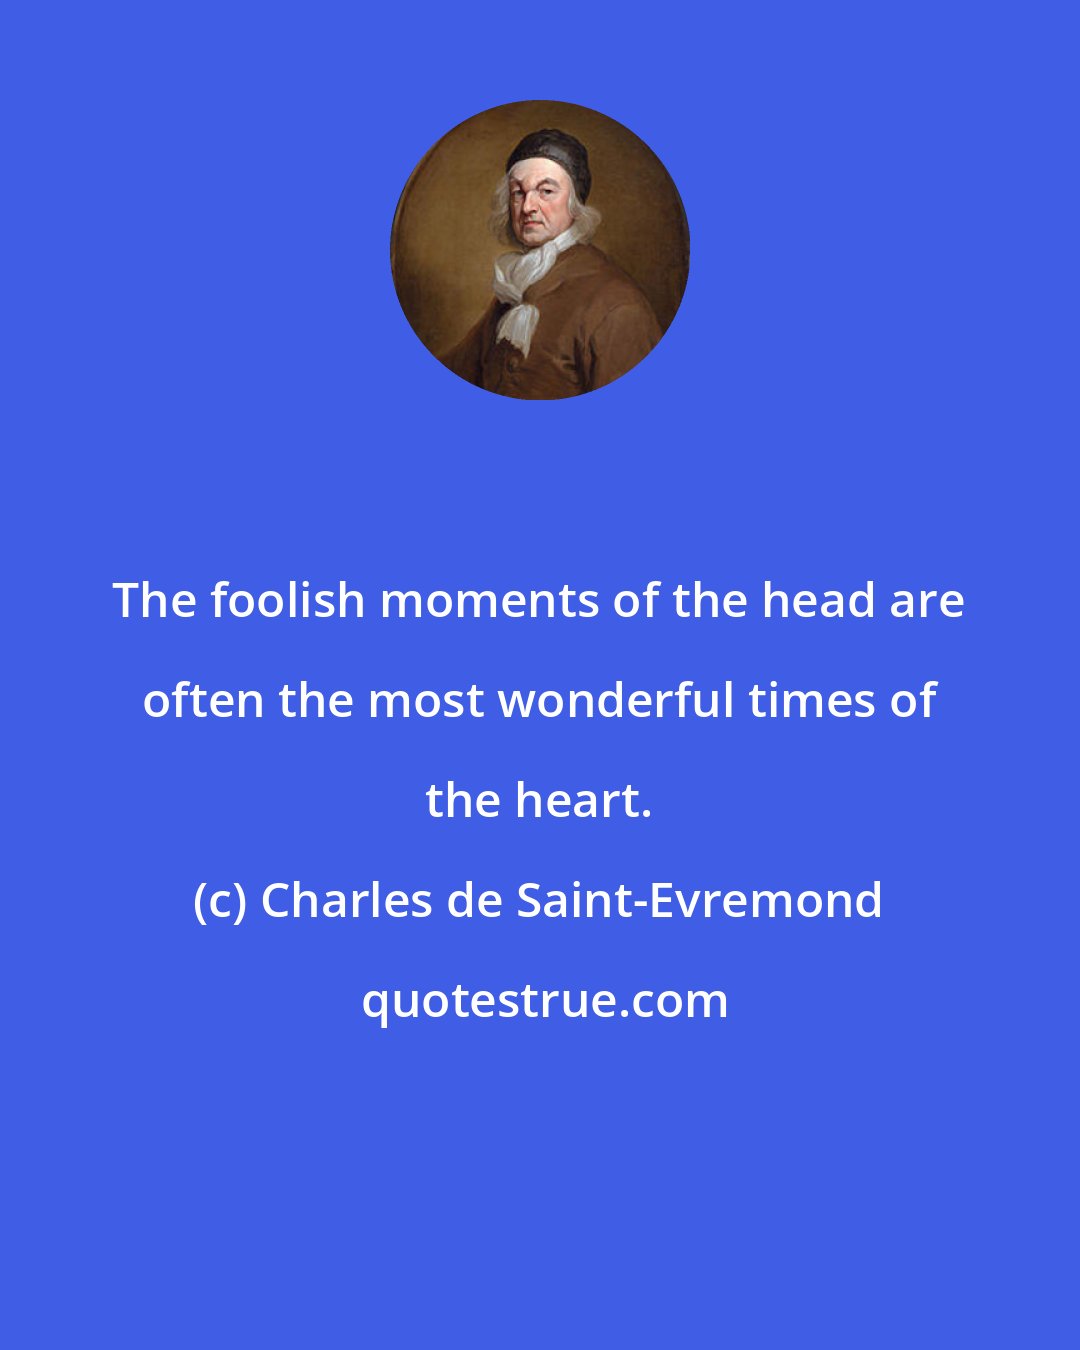 Charles de Saint-Evremond: The foolish moments of the head are often the most wonderful times of the heart.